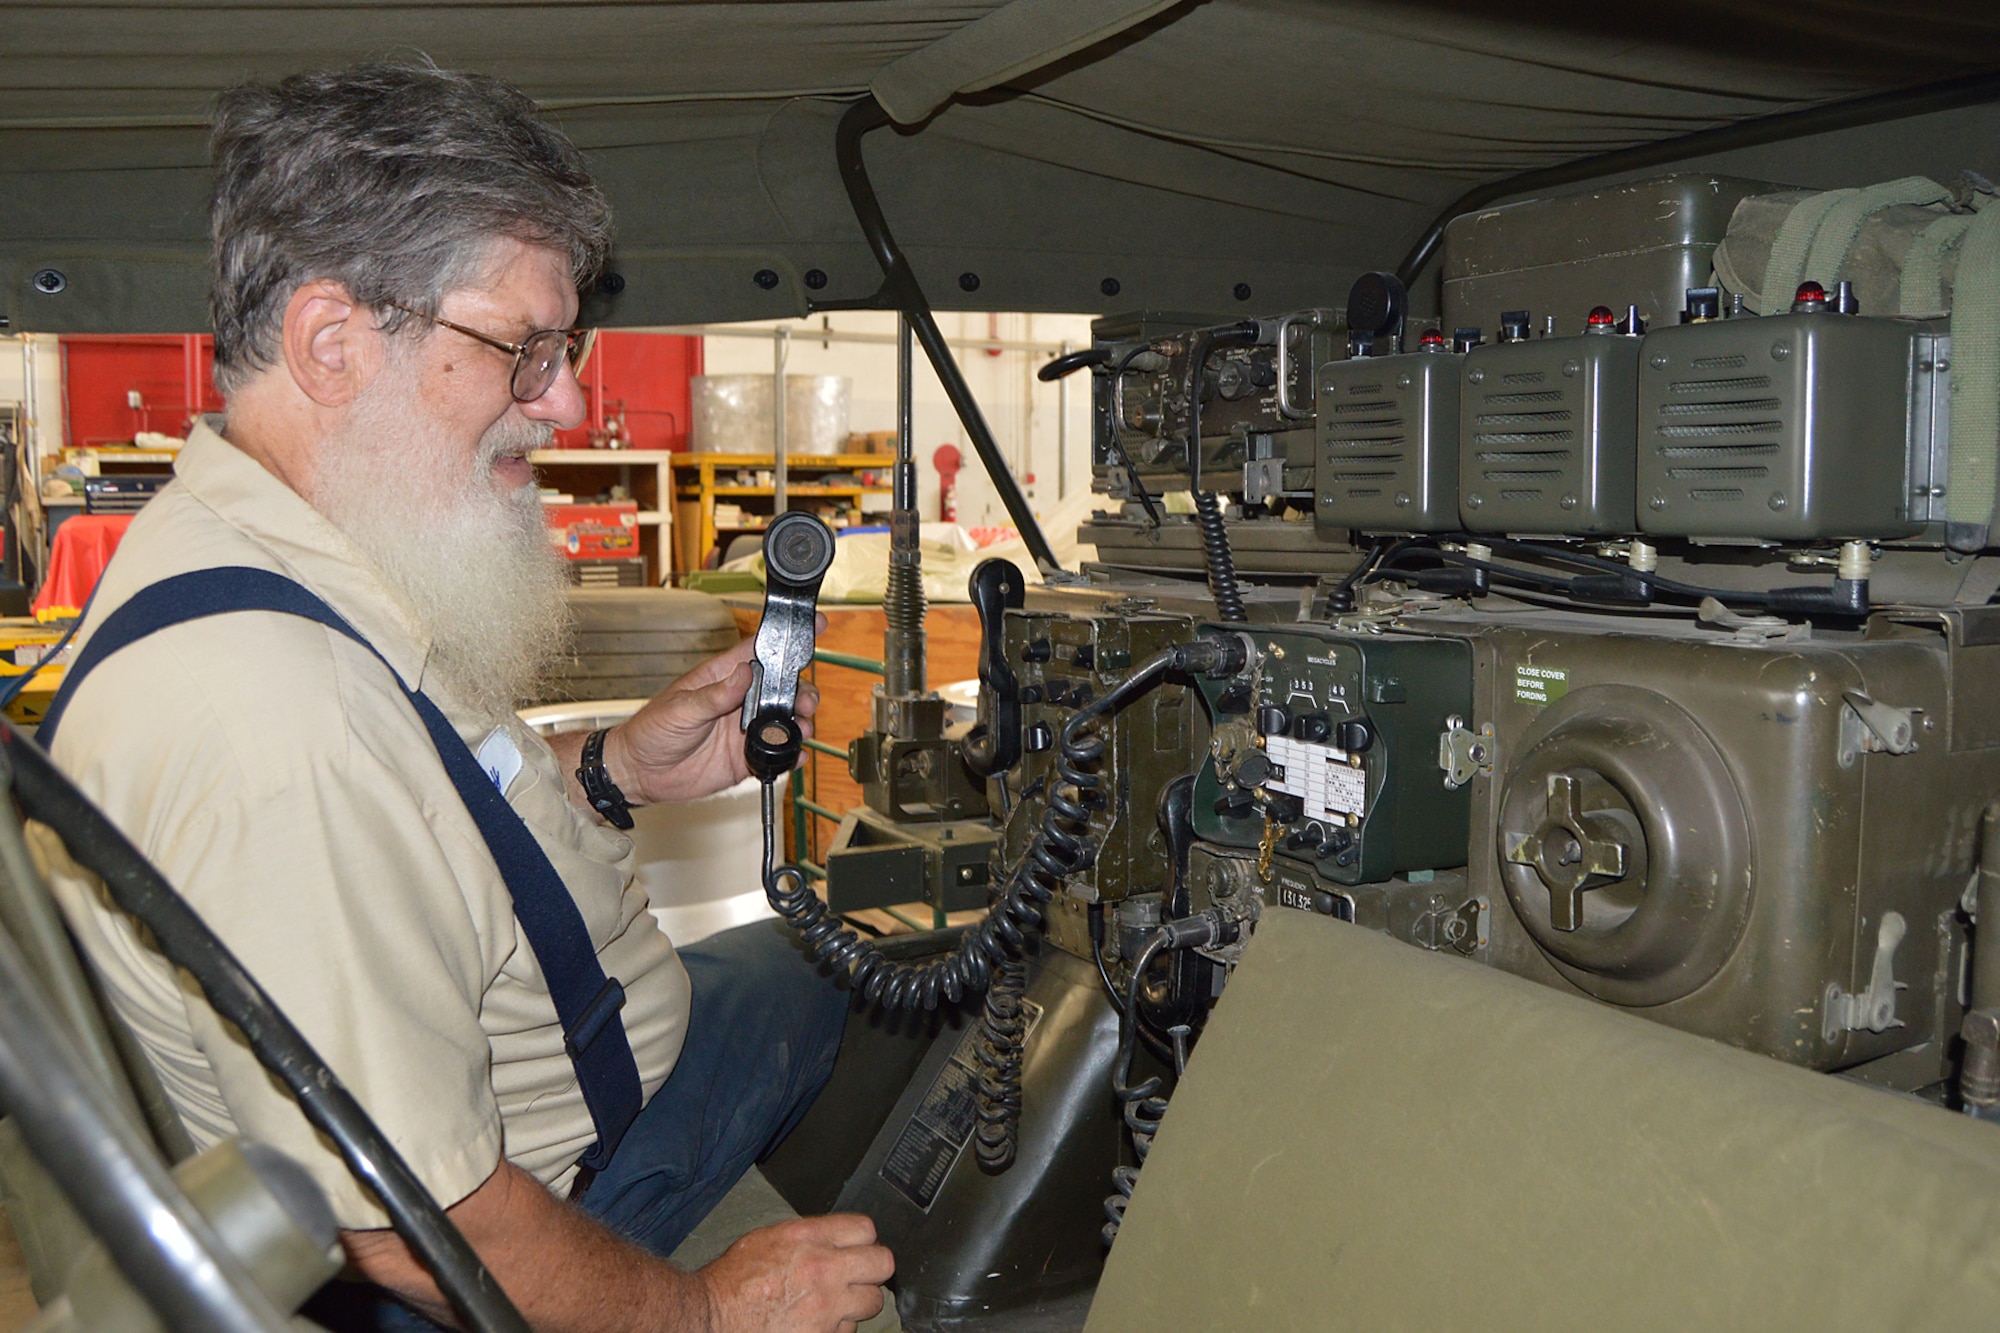 DAYTON, Ohio  -- Volunteer Larry Youngblood works on restoring the M151 Jeep. This vehicle was modified into a Forward Air Control (FAC) Jeep, which communicated with FAC aircraft to aid troops on the ground during the Southeast Asia War. Plans call for the Jeep to be displayed in the Southeast Asia War Gallery. (U.S. Air Force photo by Ken LaRock)